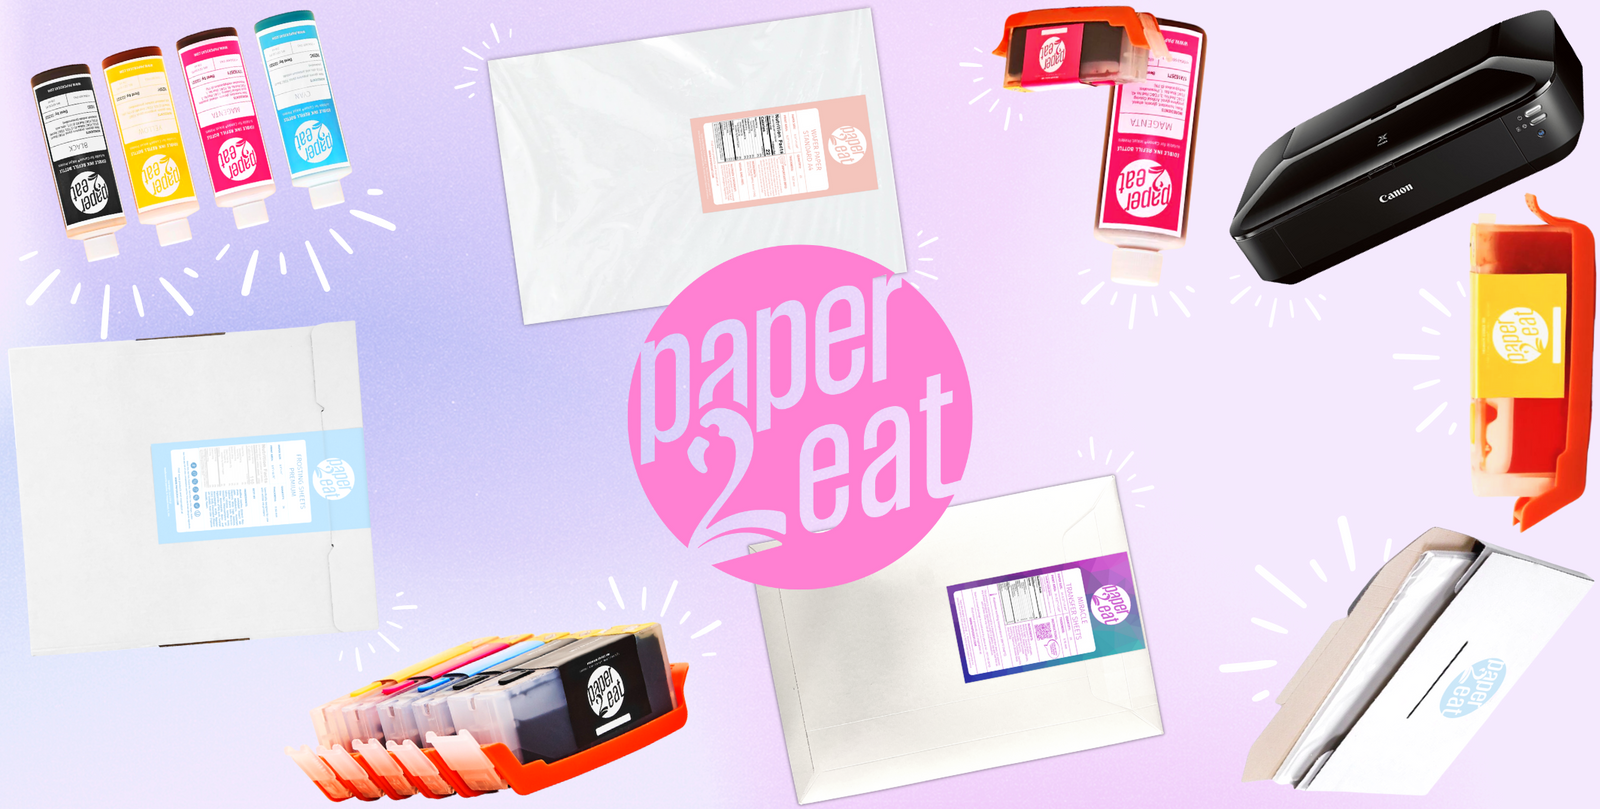  paper2eat edible Miracle Transfer Sheets (formerly